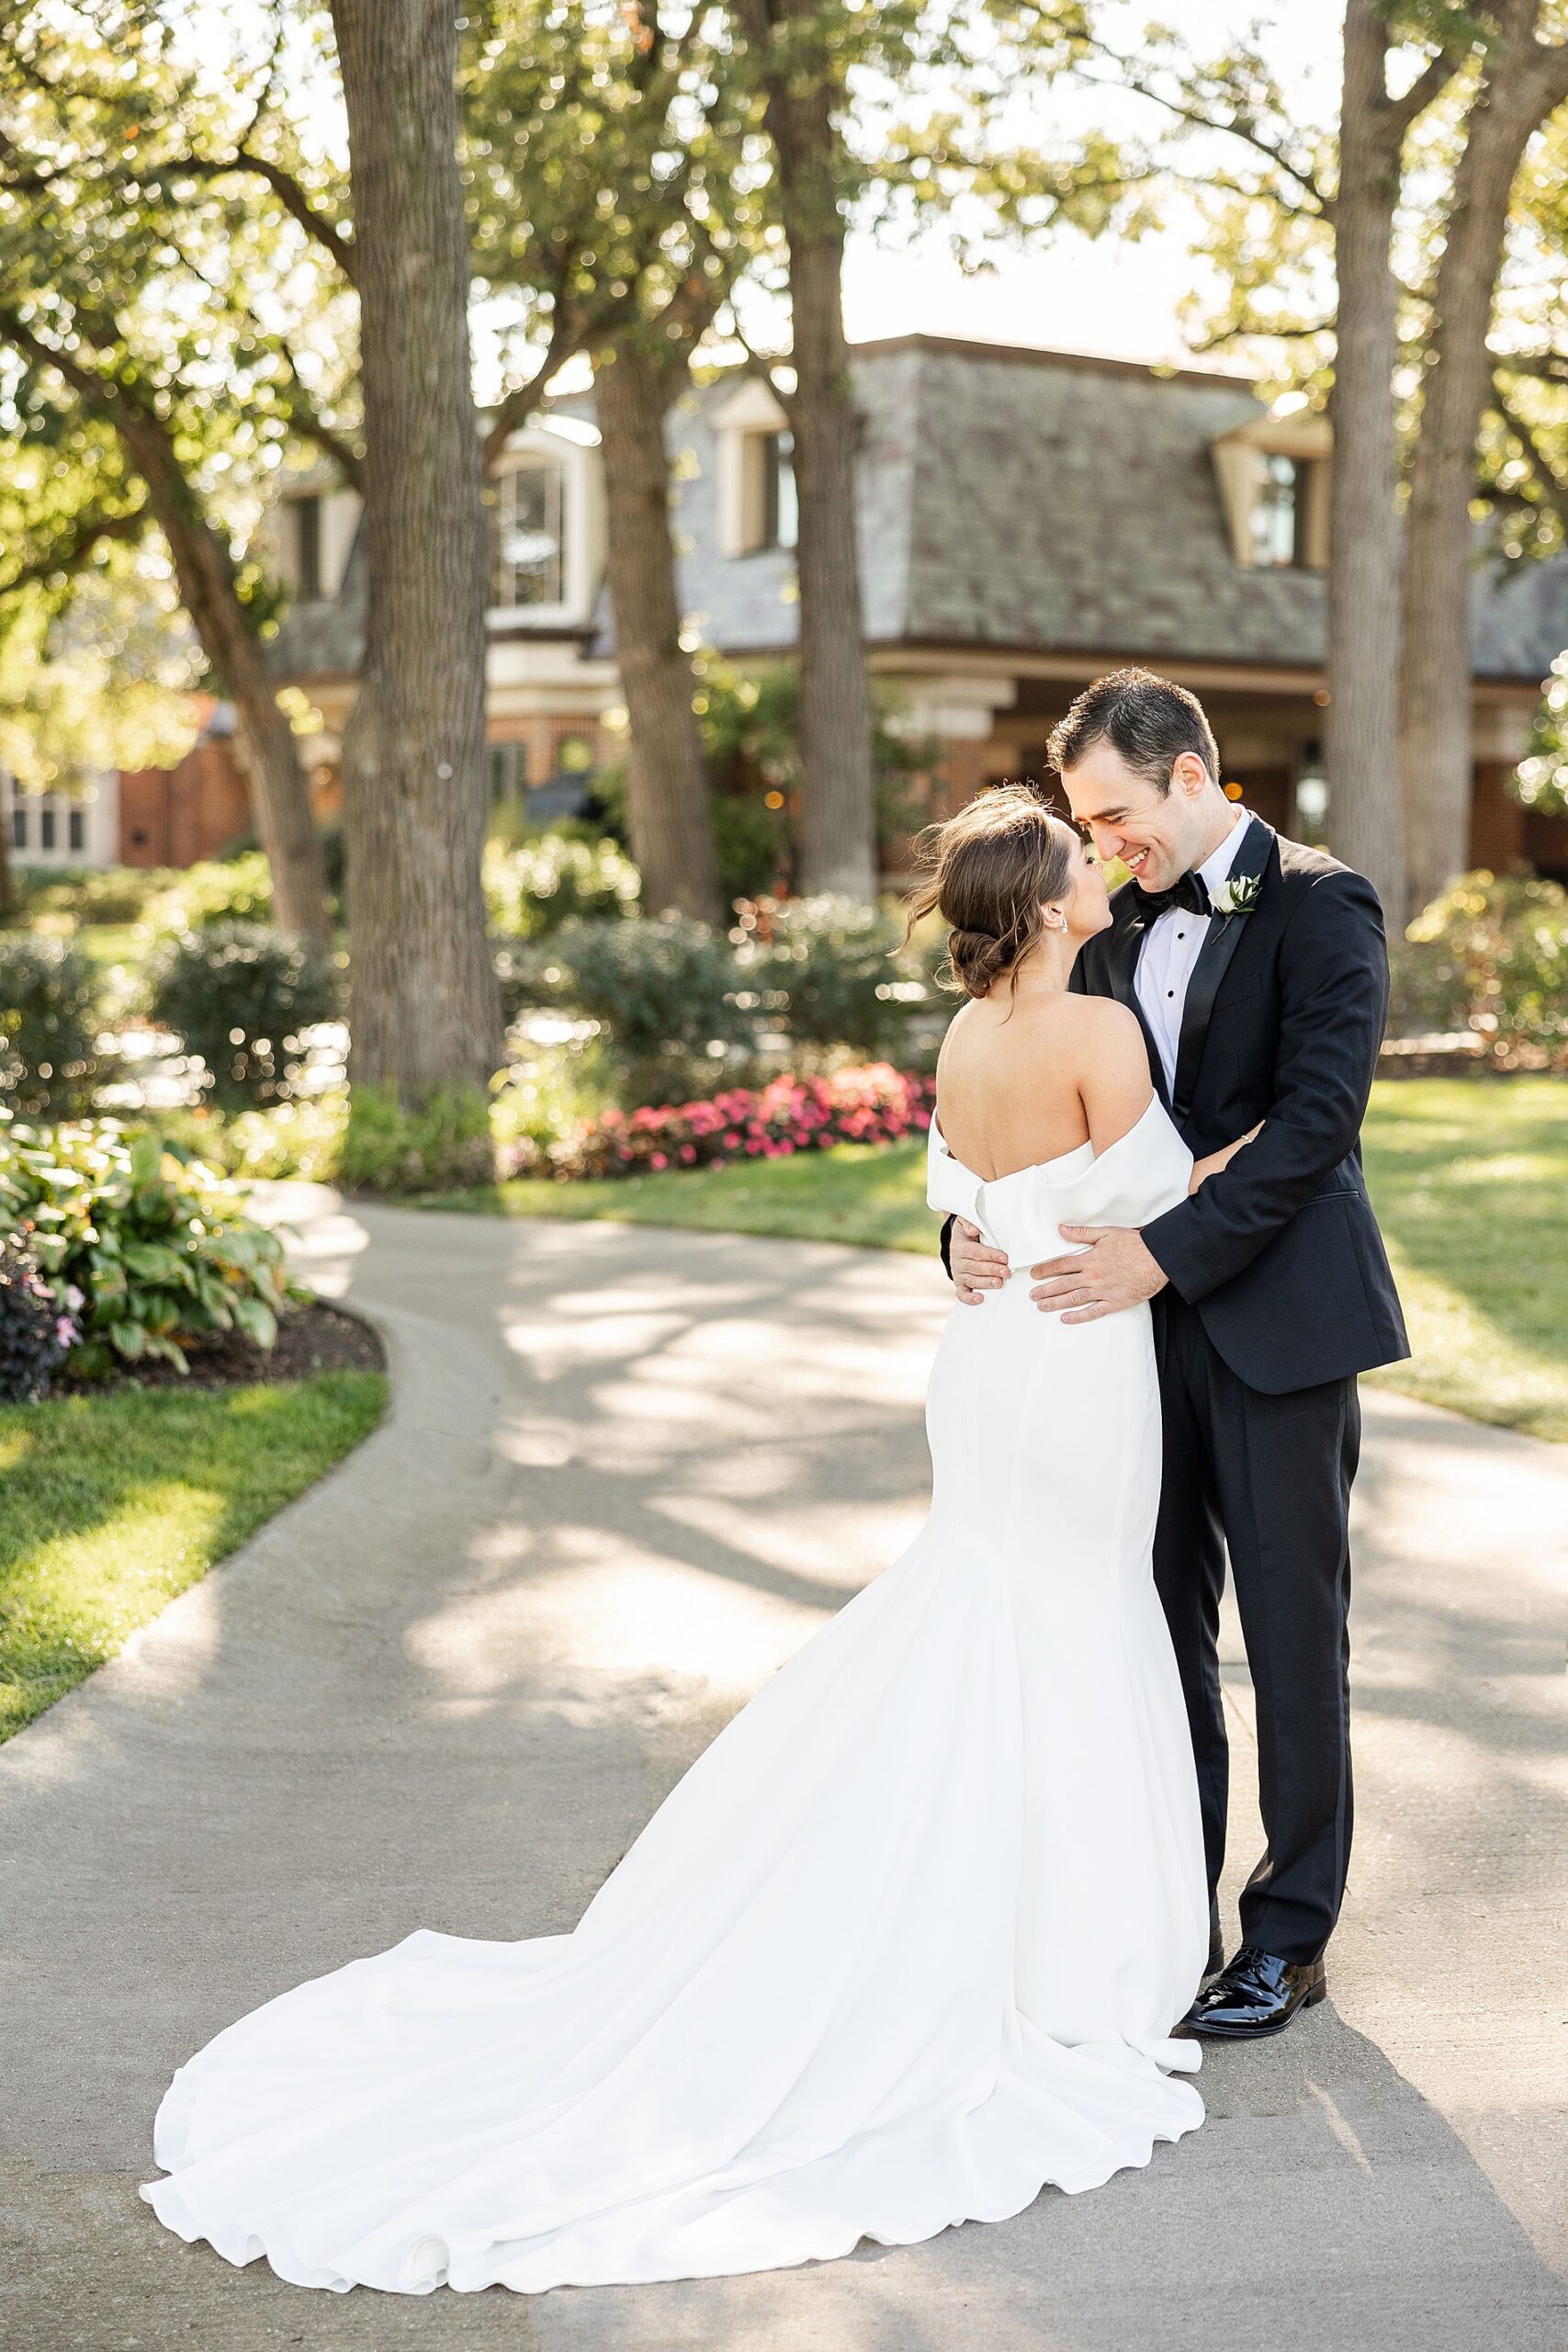 candid wedding portraits at Butterfield Country Club in Oak Brook Illinois